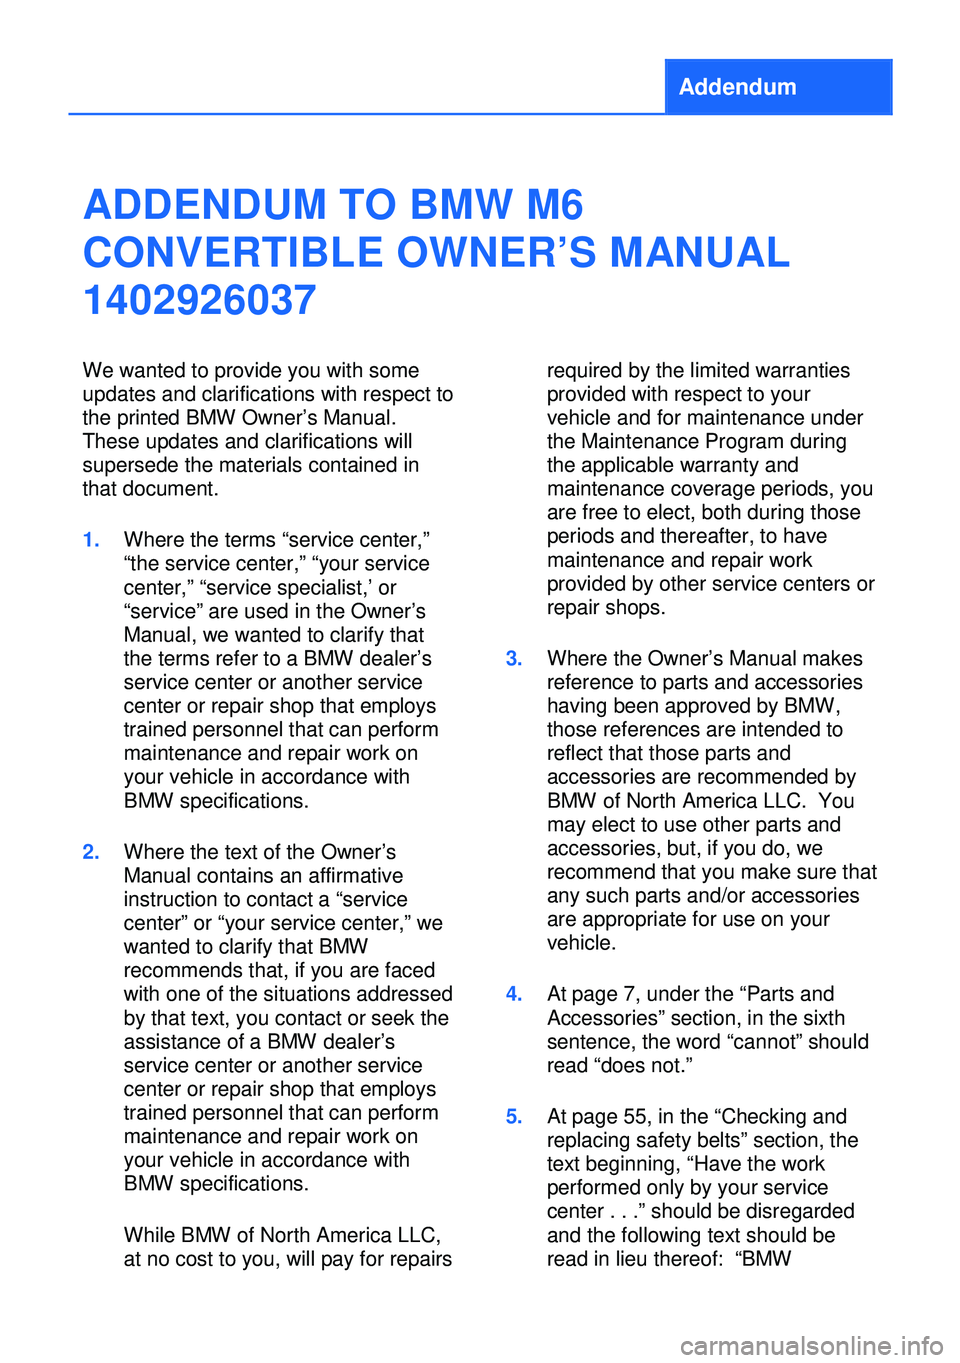 BMW M6 CONVERTIBLE 2013 F12 Owners Manual Addendum
ADDENDUM TO BMW M6
CONVERTIBLE OWNER’S MANUAL
1402926037
We wanted to provide you with some
updates and clarifications with respect to
the printed BMW Owner’s Manual.
These updates and cl